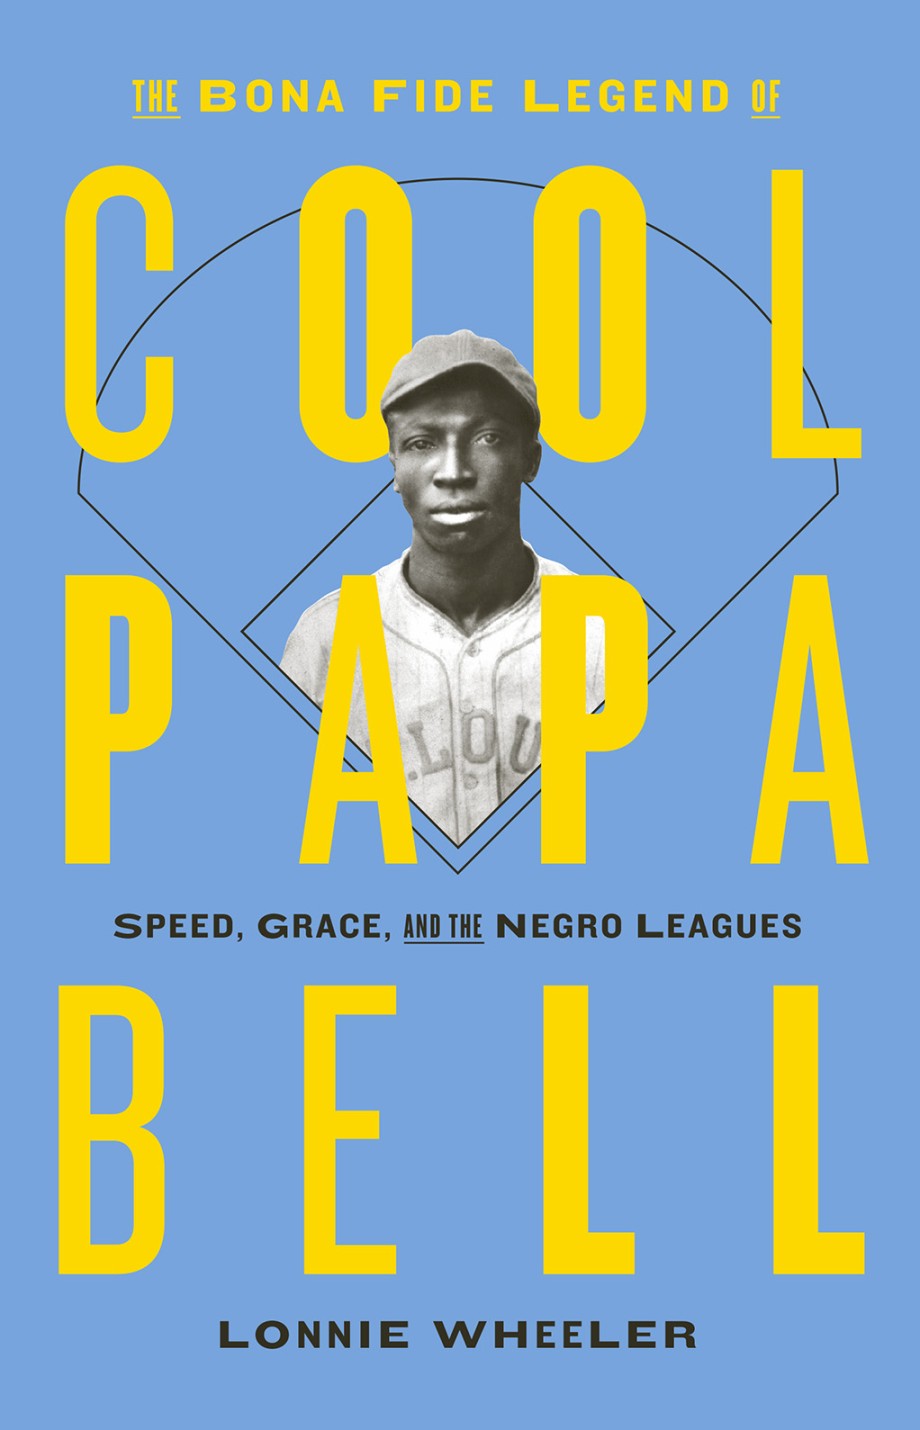 Bona Fide Legend of Cool Papa Bell Speed, Grace, and the Negro Leagues